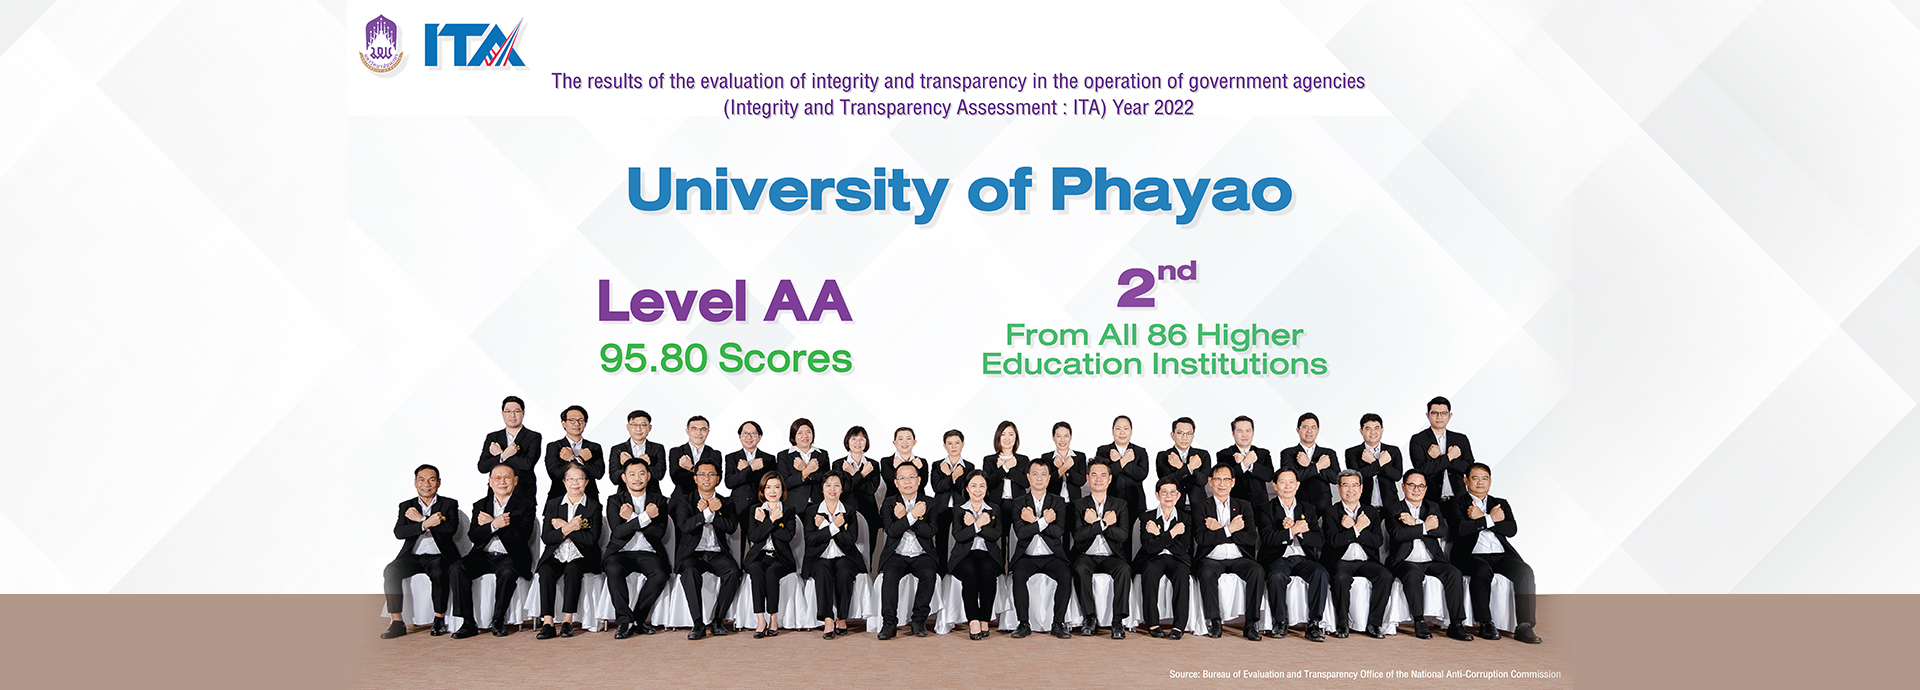 Planning Division - University of Phayao